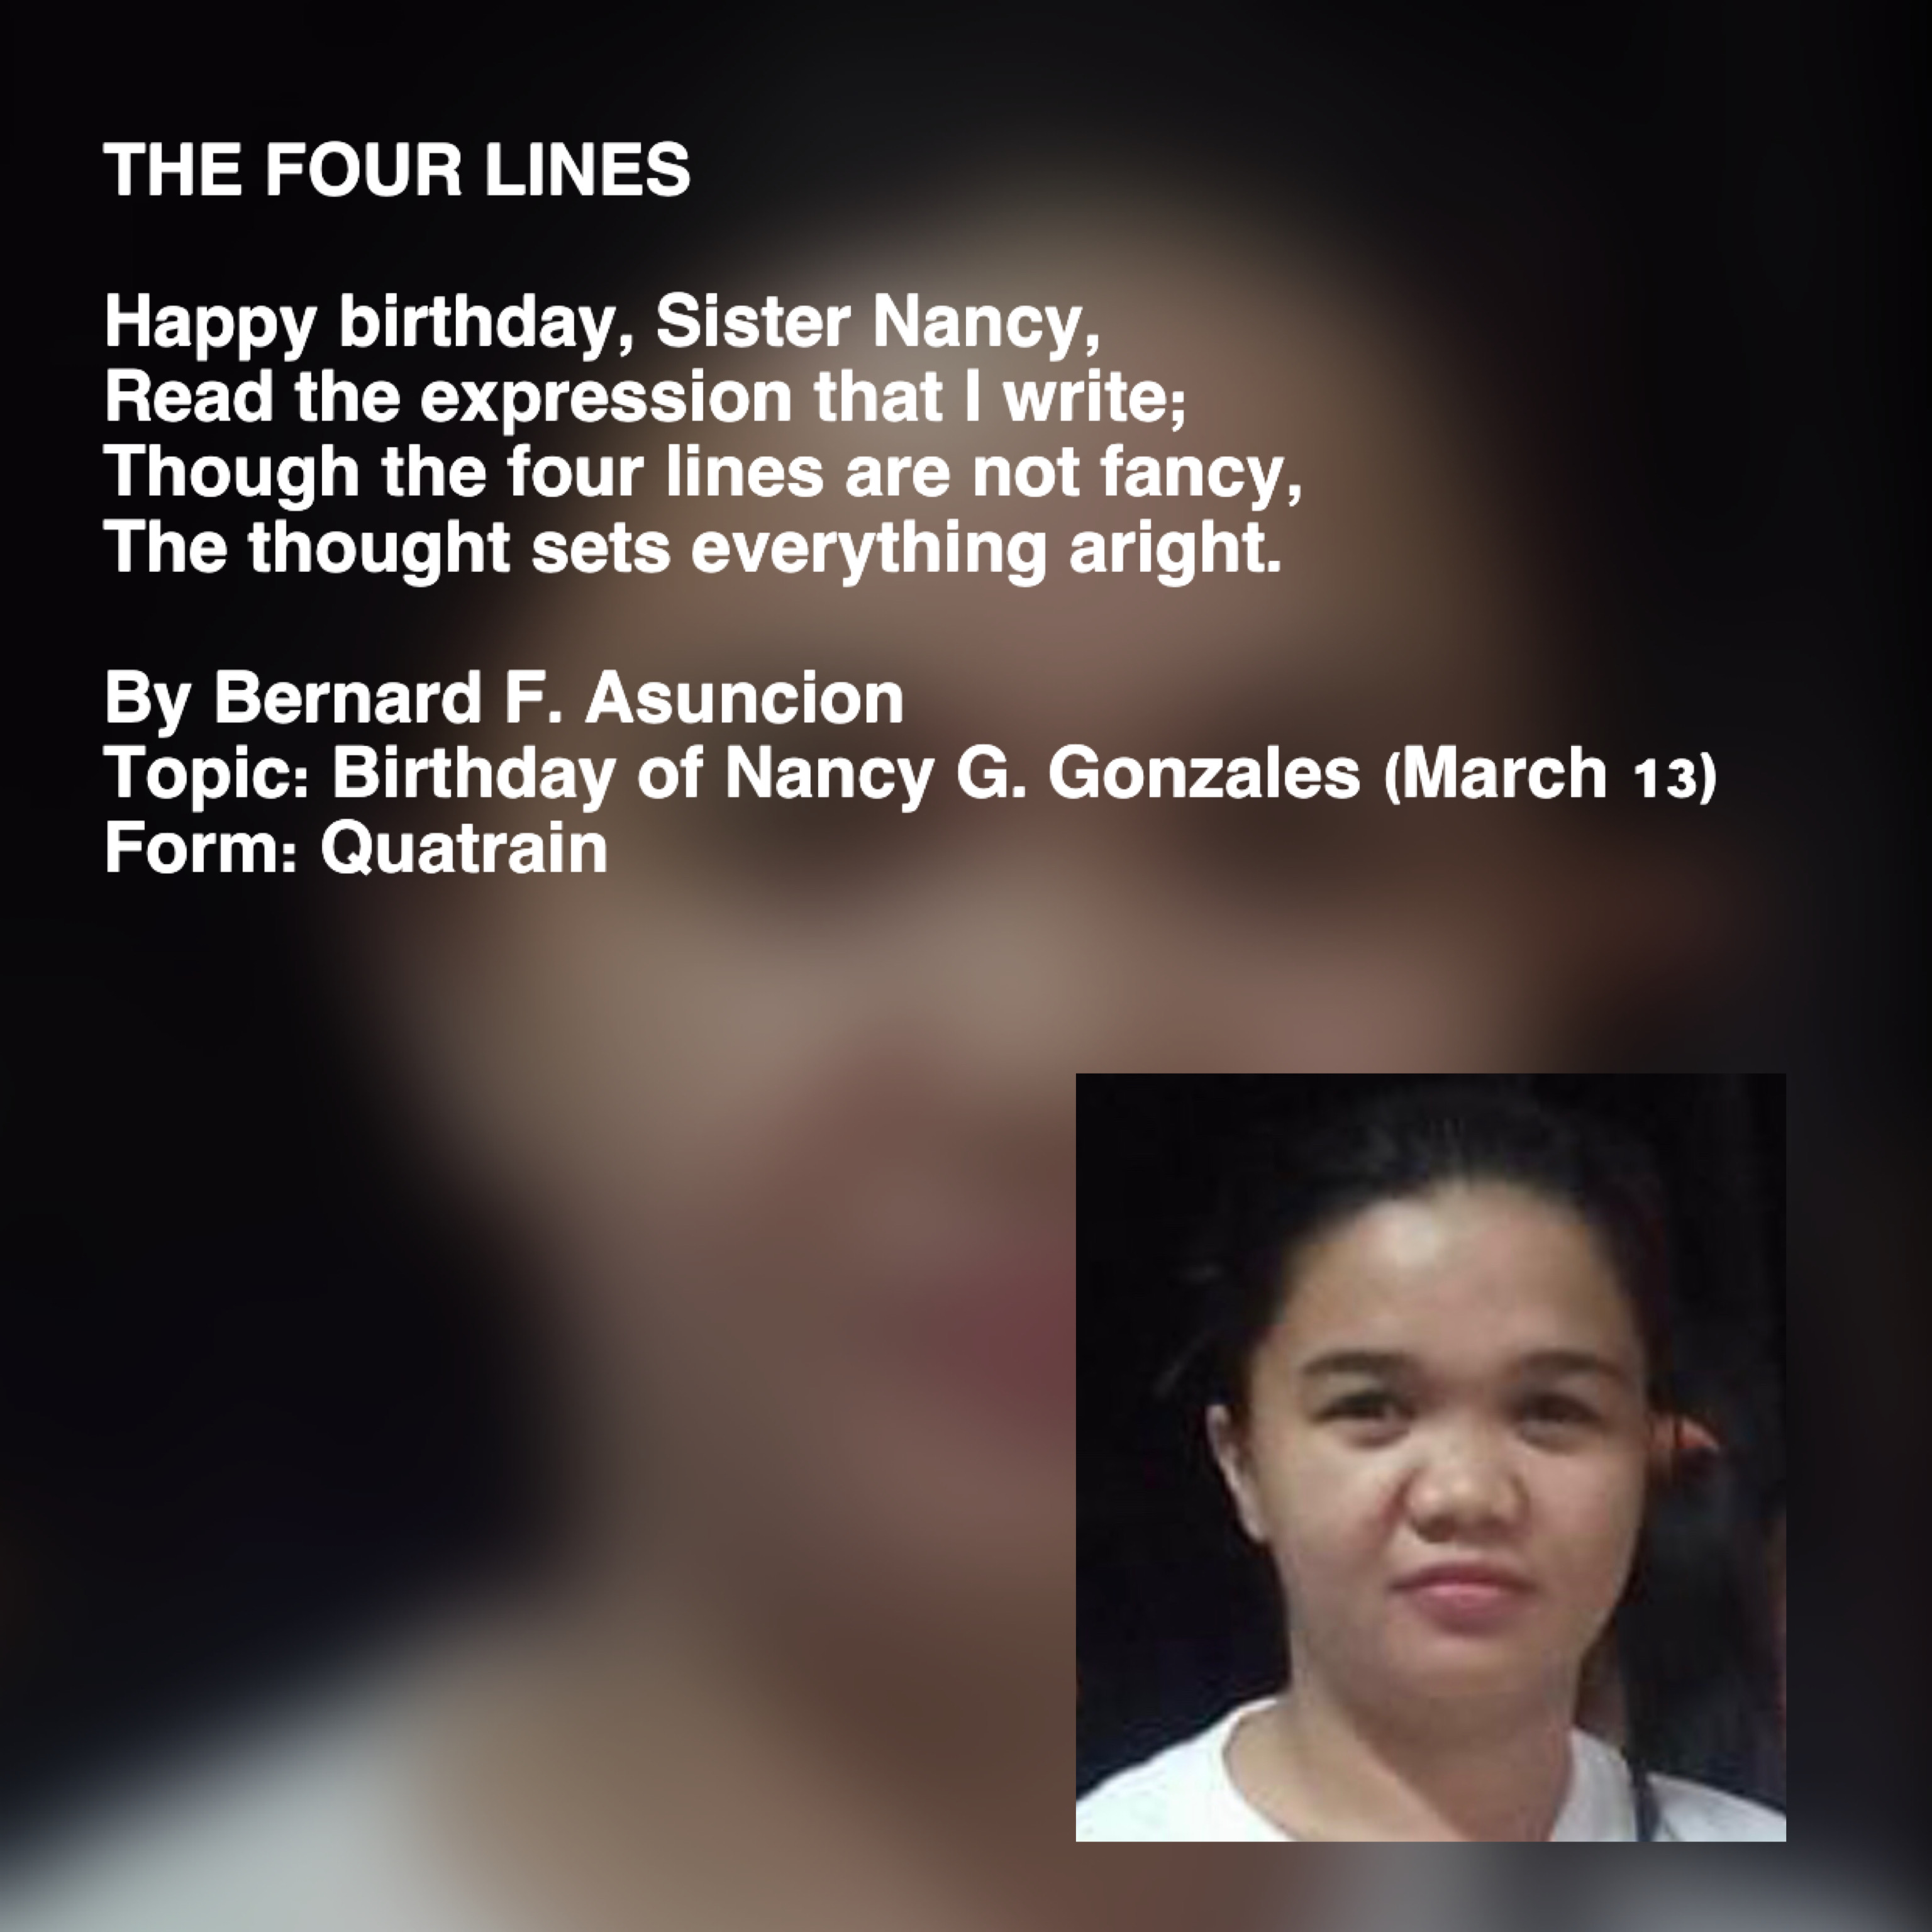 The Four Lines